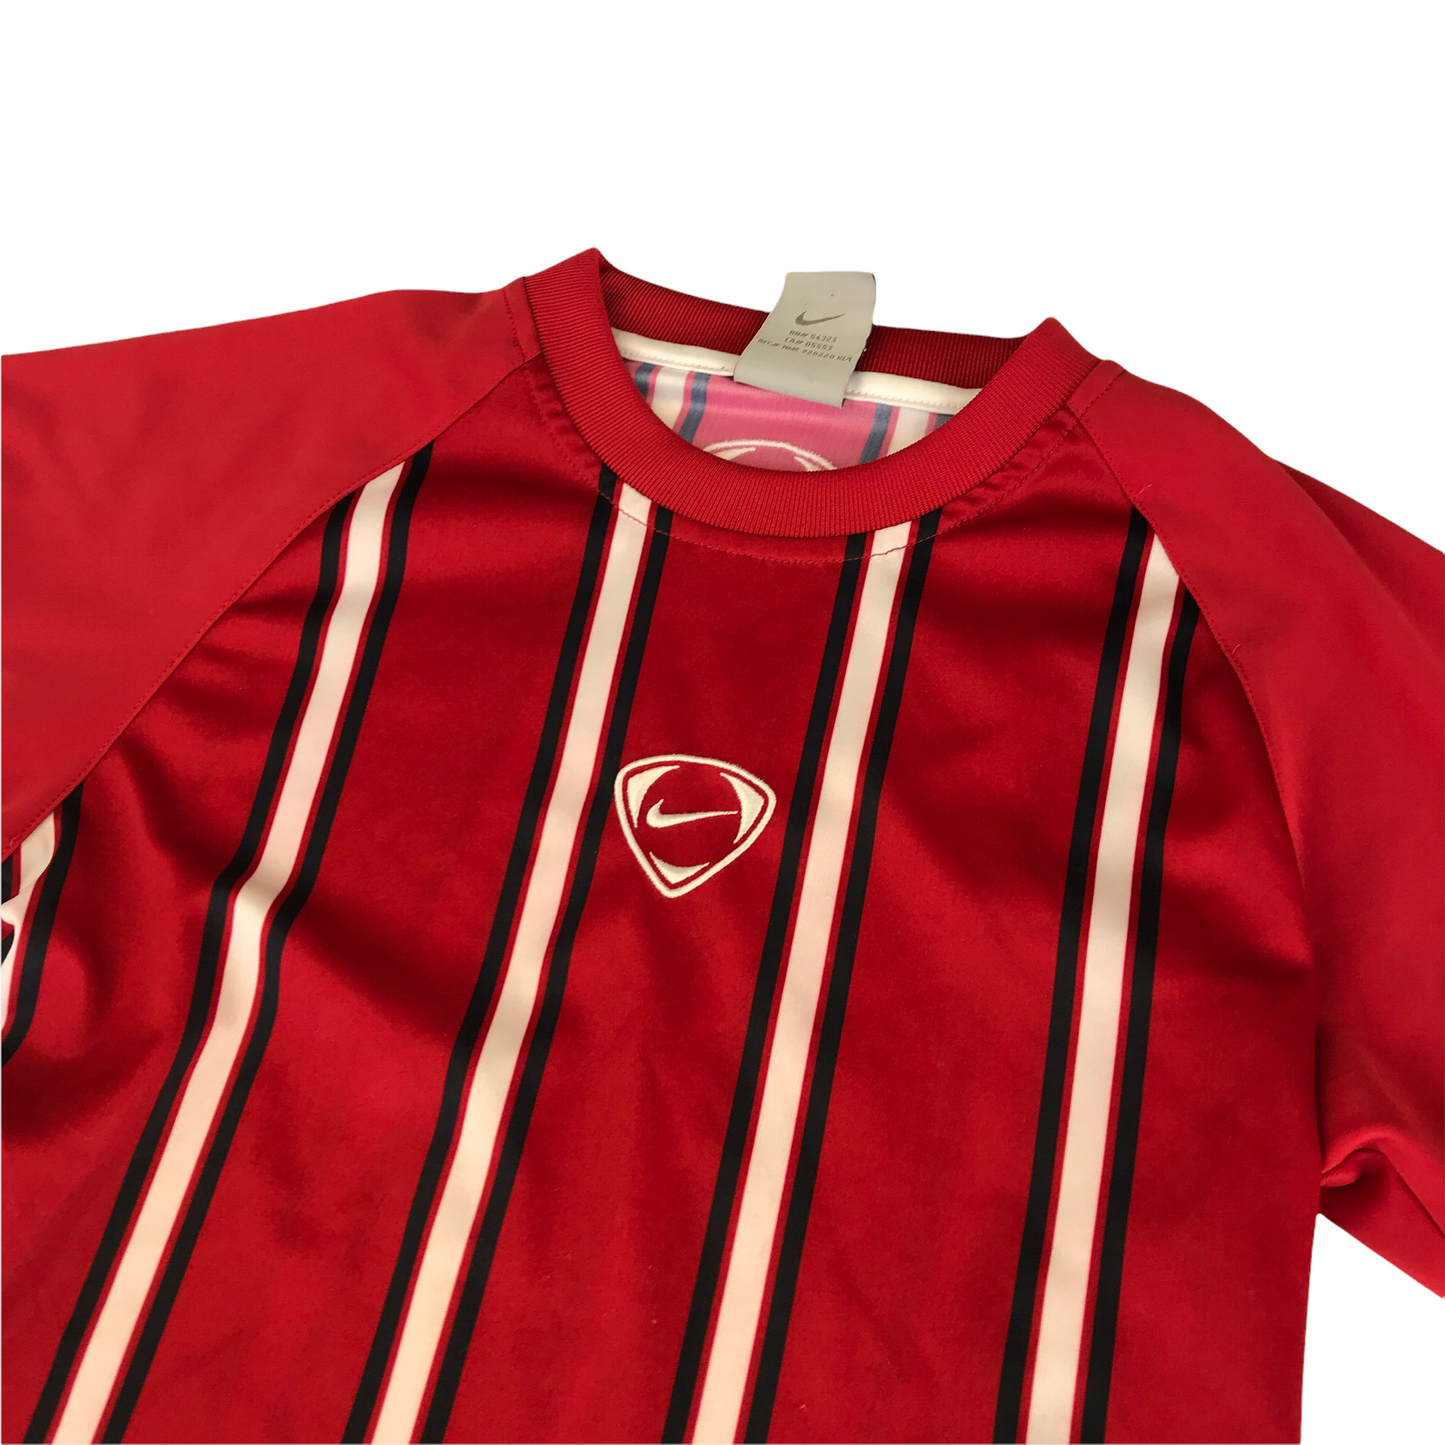 Nike Red Stripy Sports Top Age 9